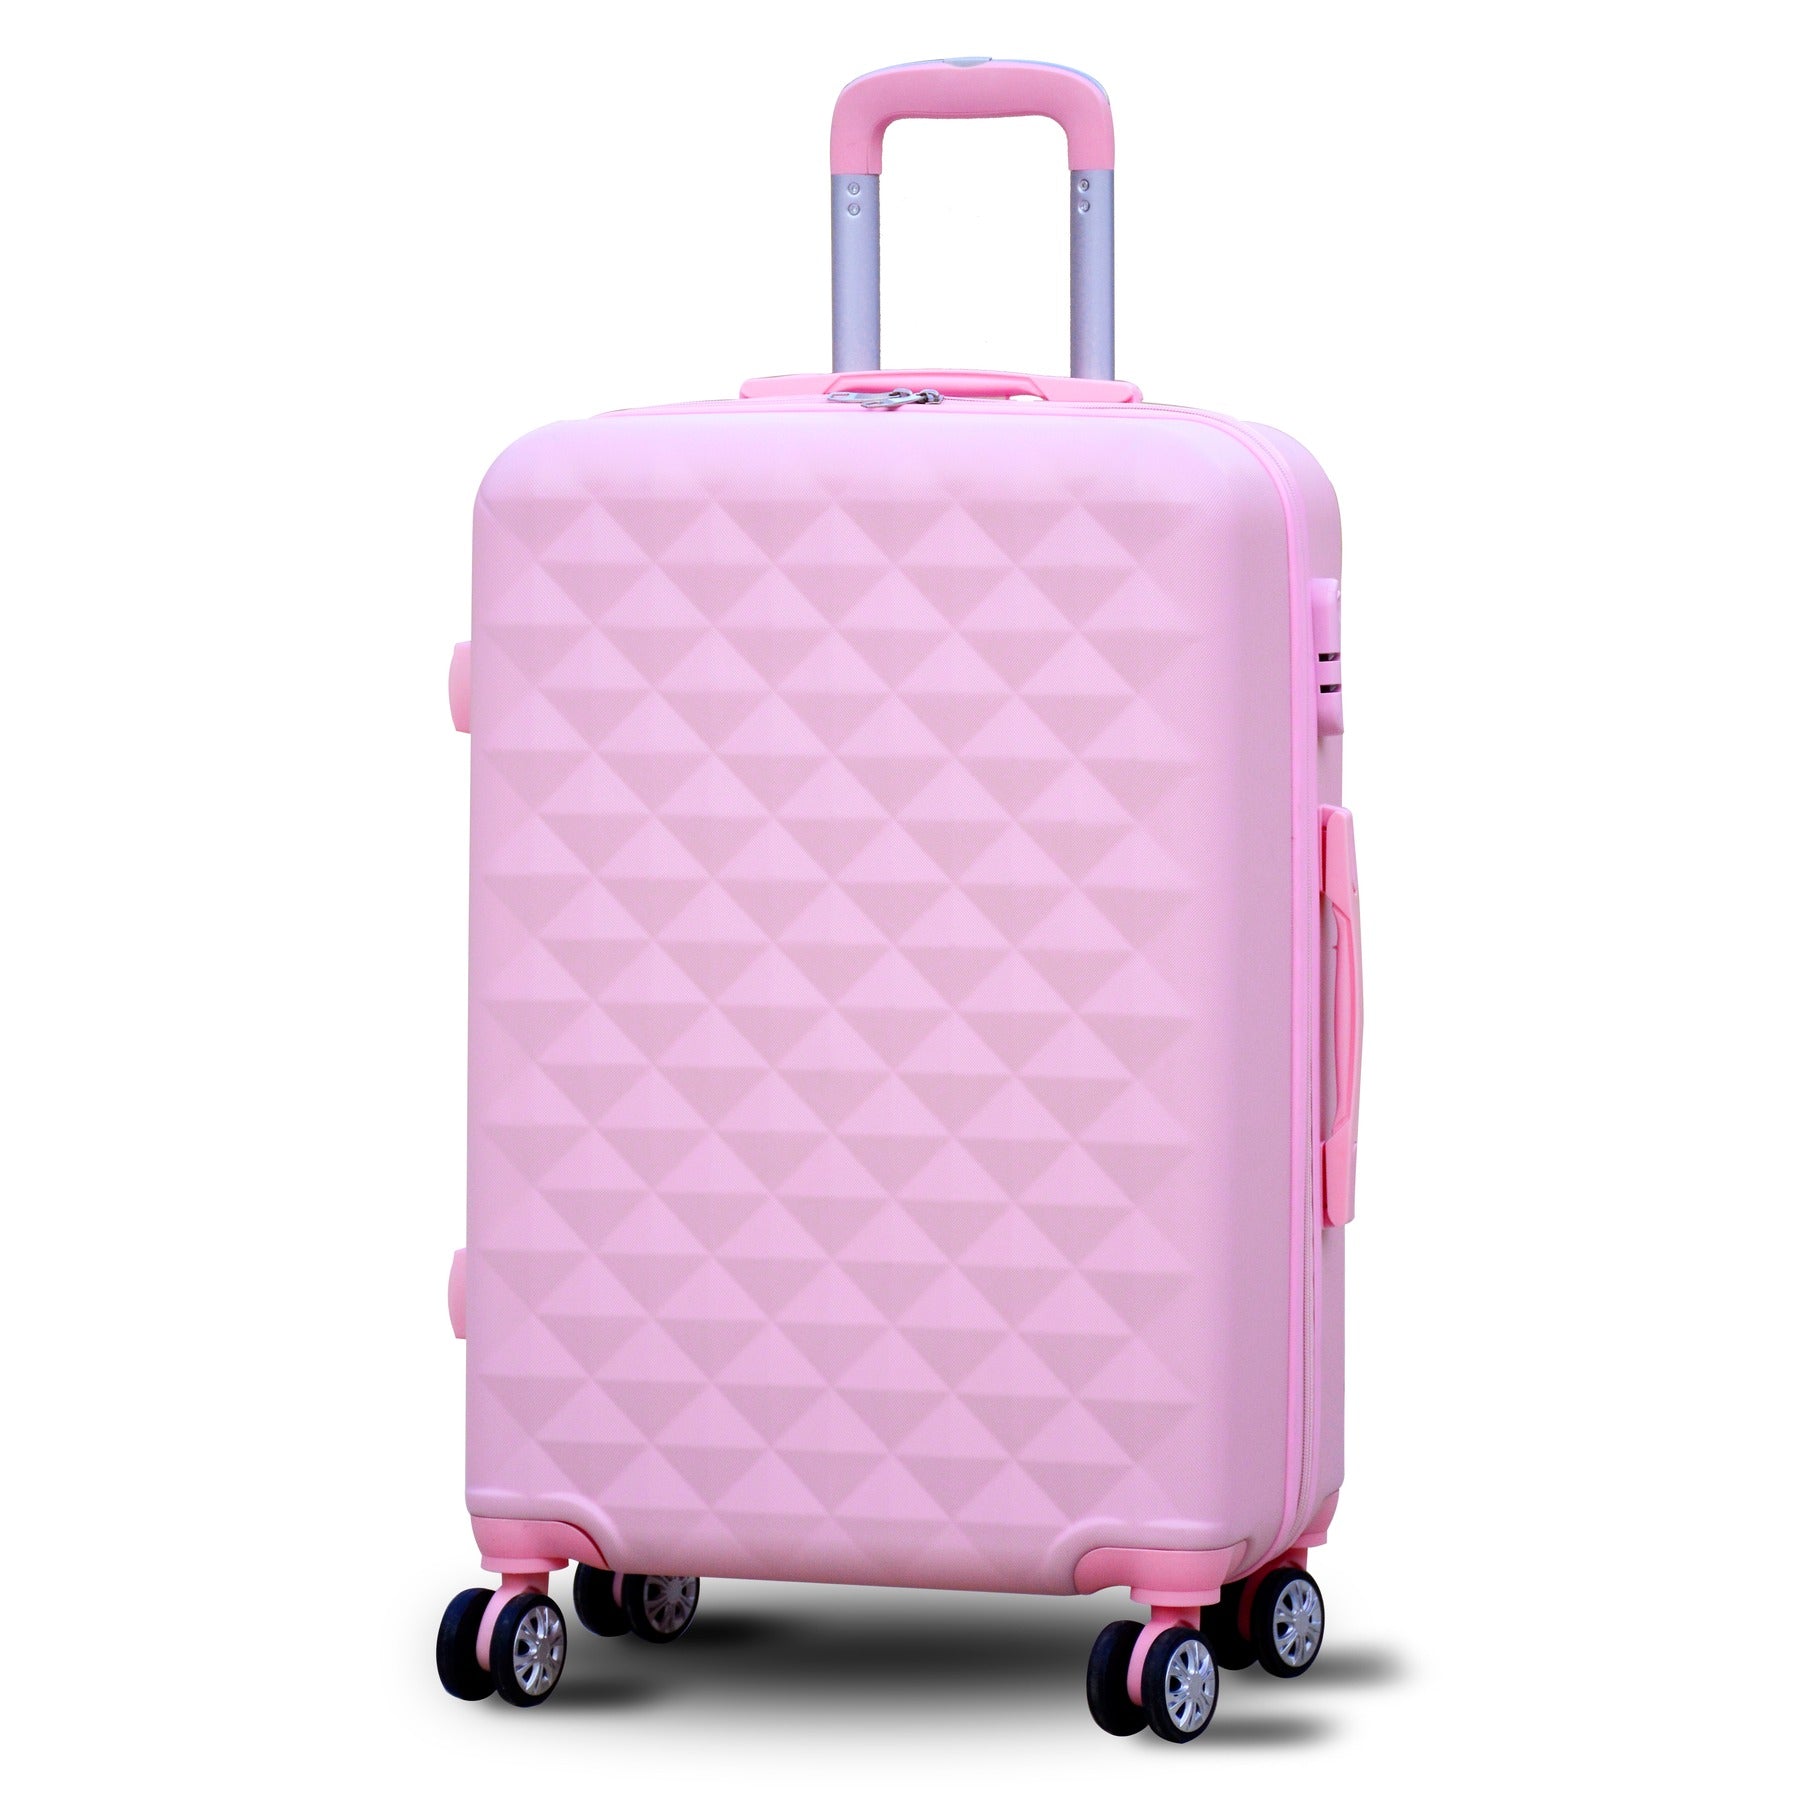 24" Diamond Cut ABS Lightweight Luggage Bag With Spinner Wheel Zaappy